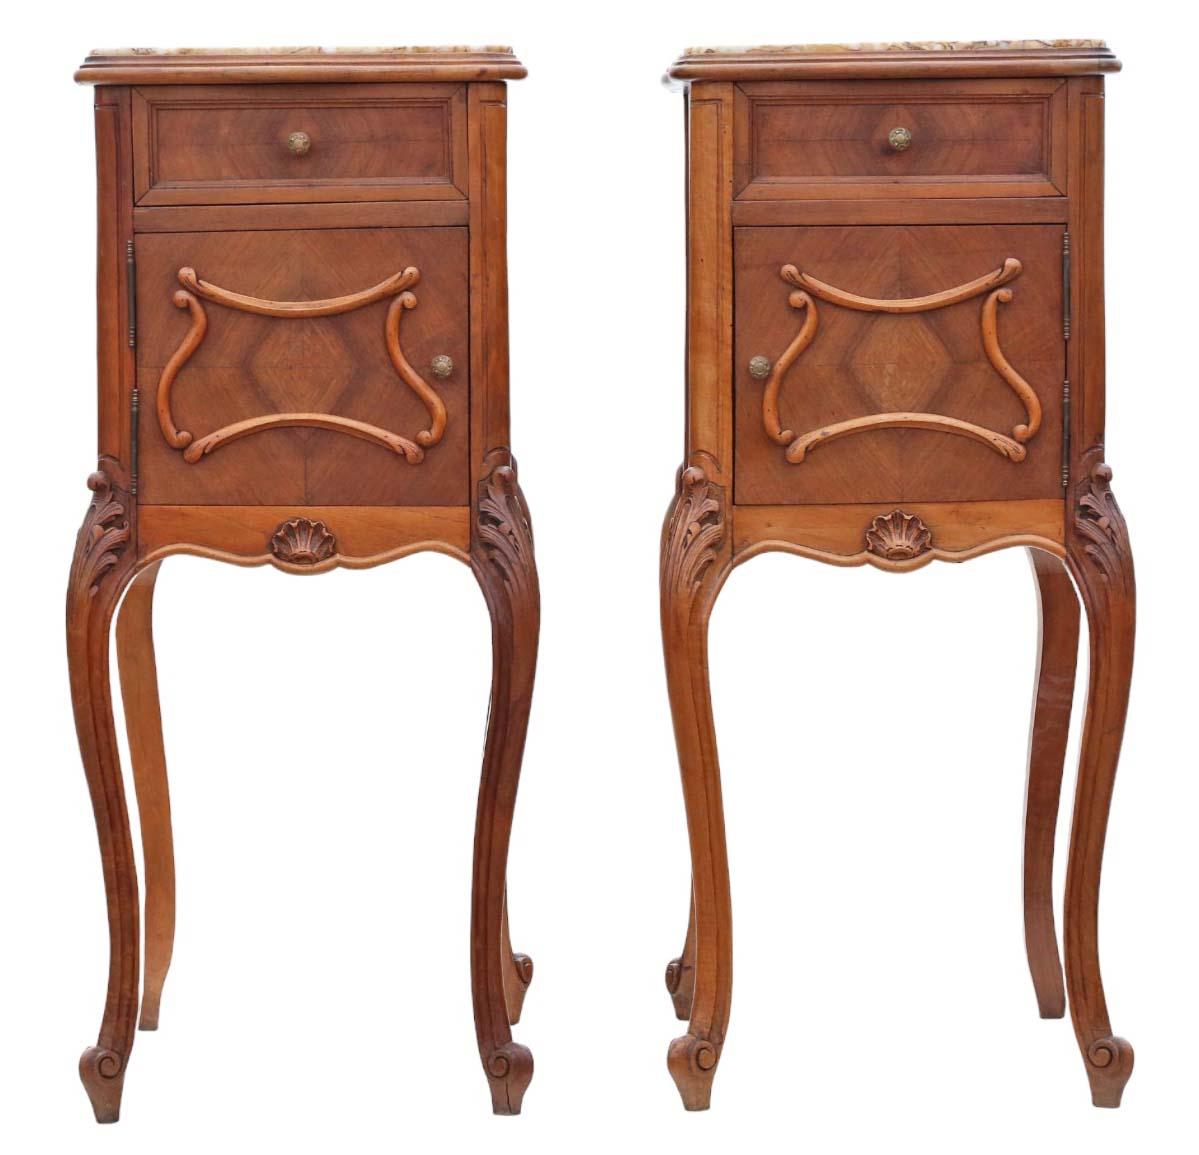 Antique, high-quality pair of French walnut (or possibly cherry) bedside tables/cupboards dating from circa 1920. Featuring loose-laid marble tops, as is customary for this style.

These pieces are sturdy and robust, with no loose joints or signs of